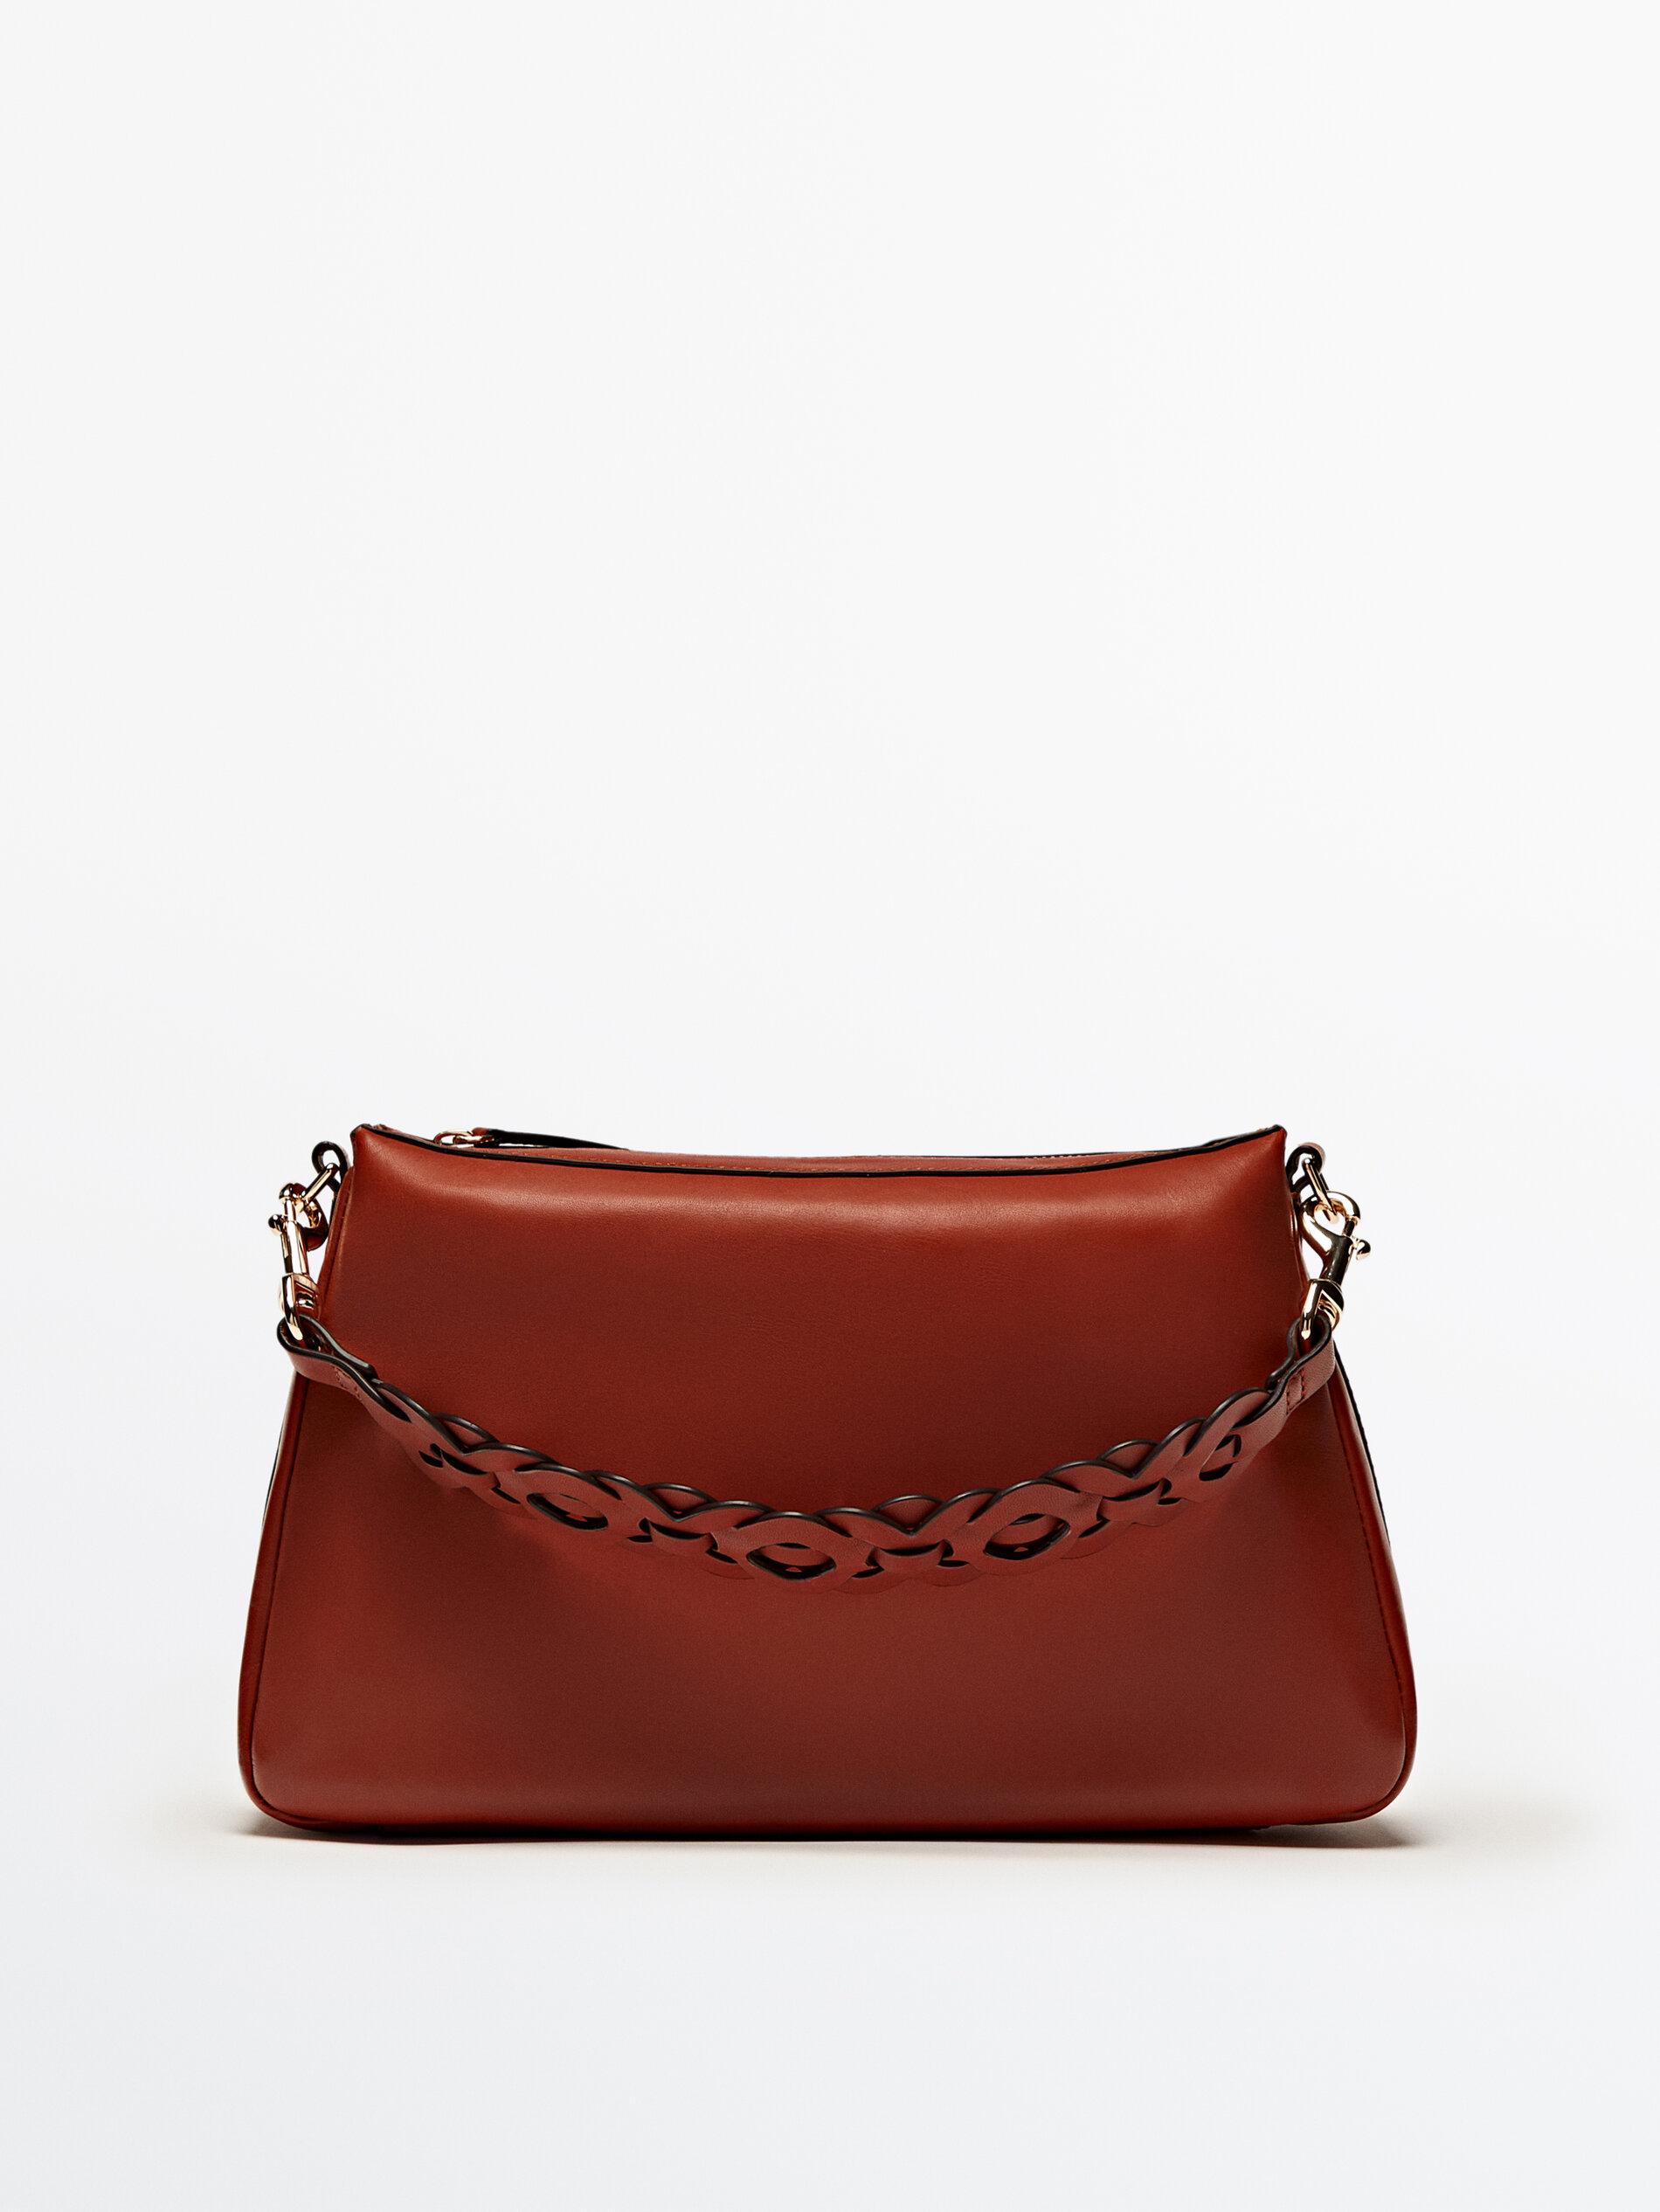 MASSIMO DUTTI Leather Shoulder Bag With Interwoven Strap in Red | Lyst